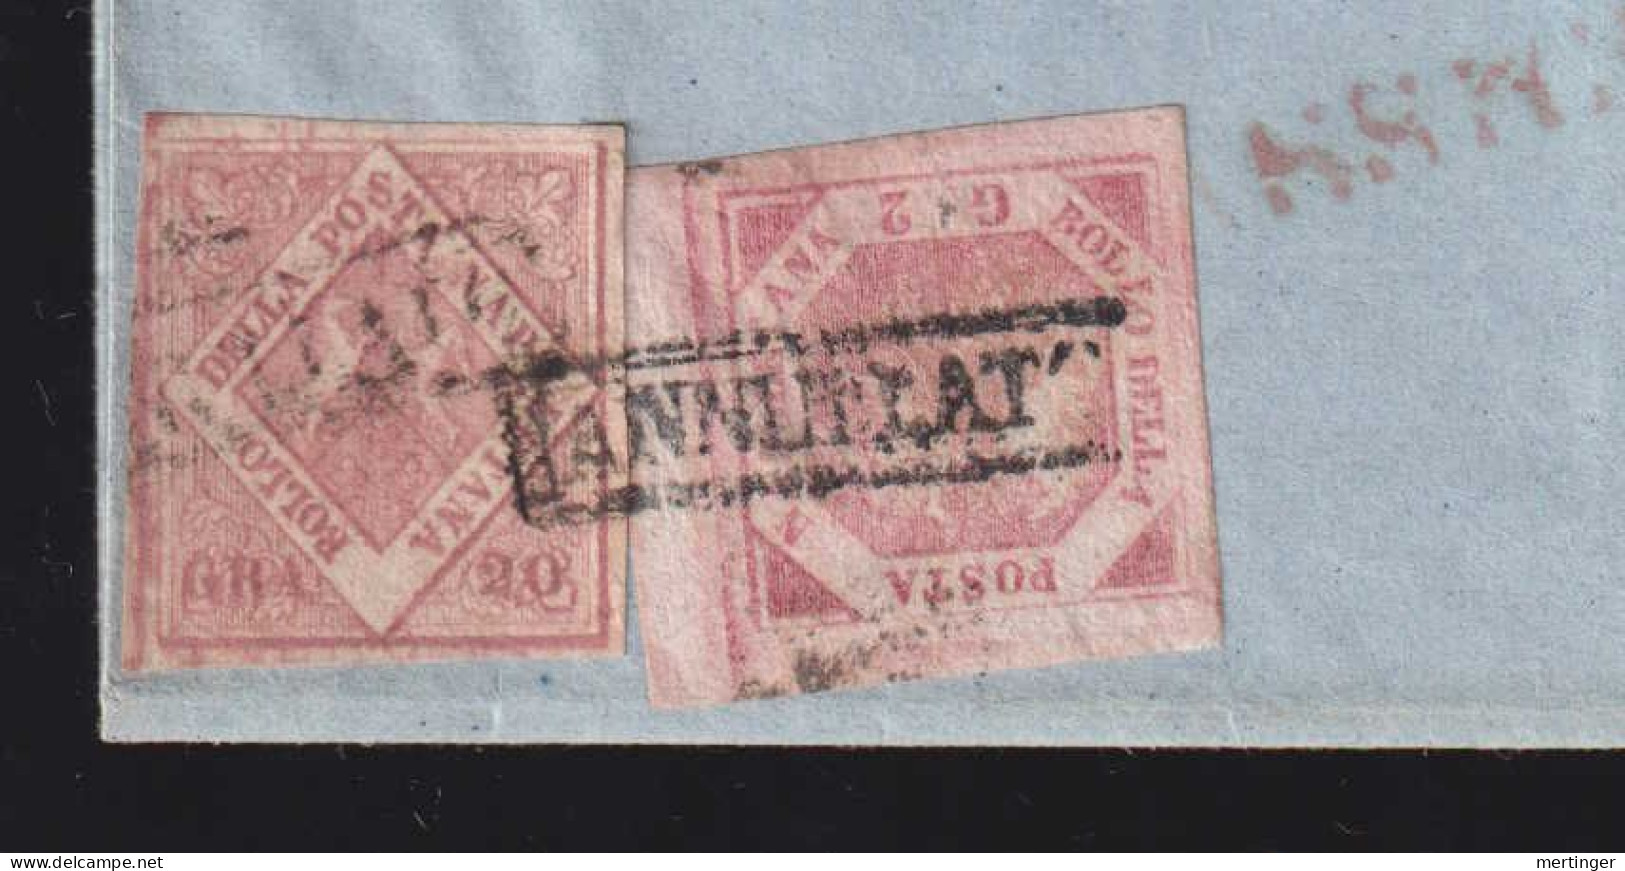 Italy Napoli 1859 Registered Cover Local Use 5x 2G + 20G - Neapel